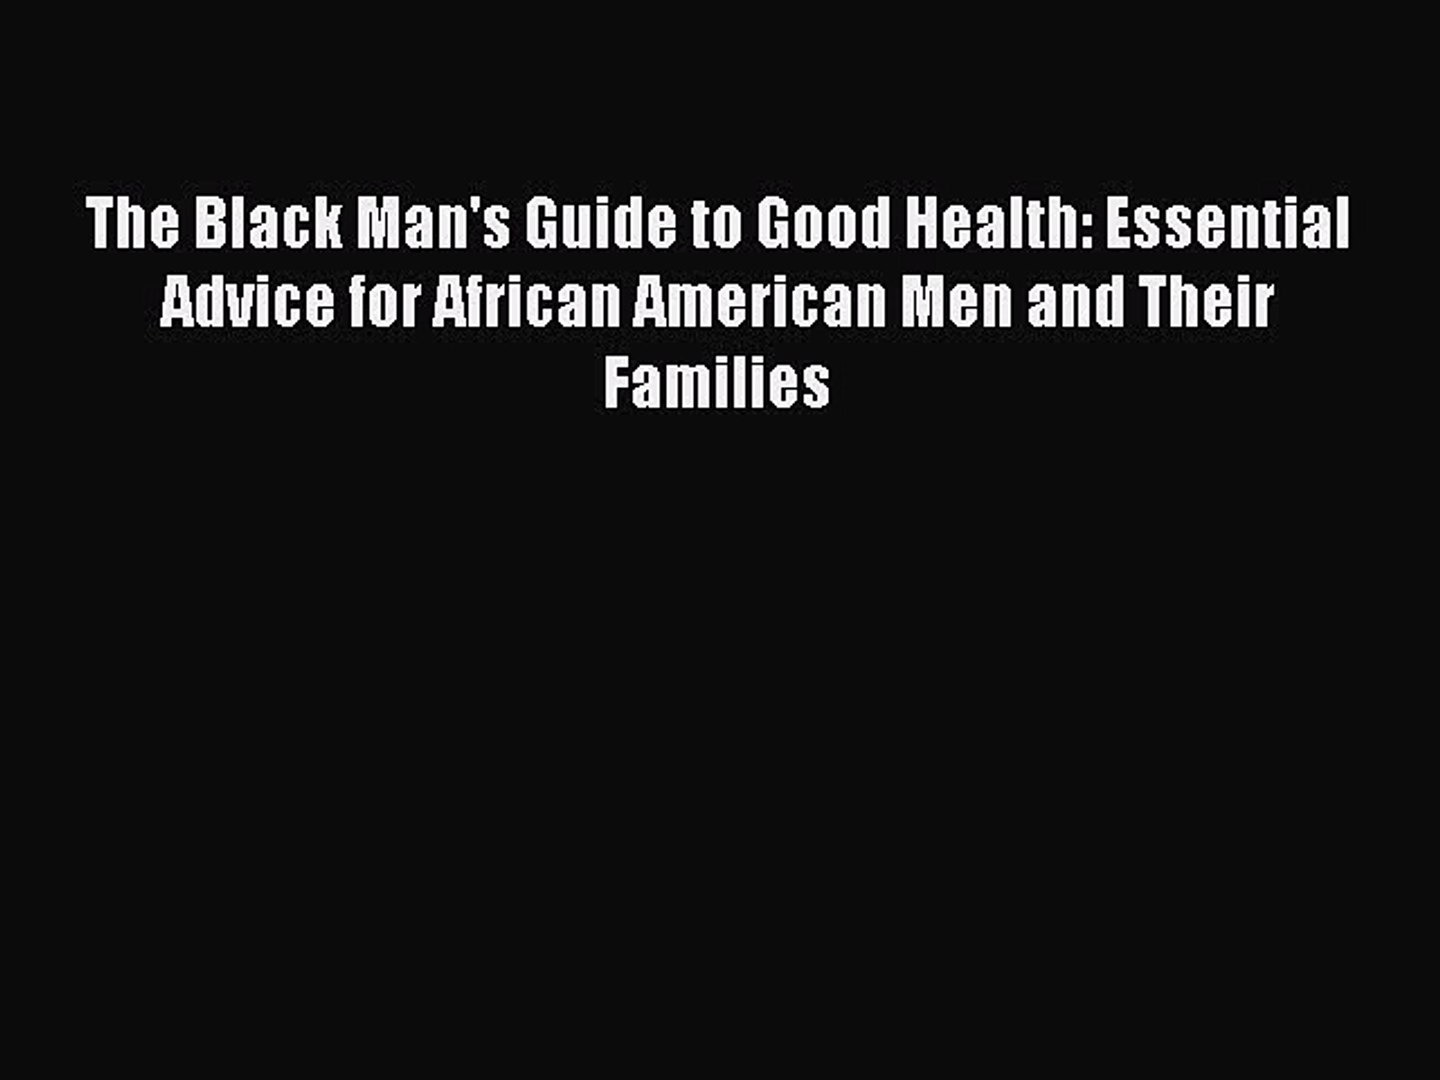 [PDF] The Black Man's Guide to Good Health: Essential Advice for African American Men and Their